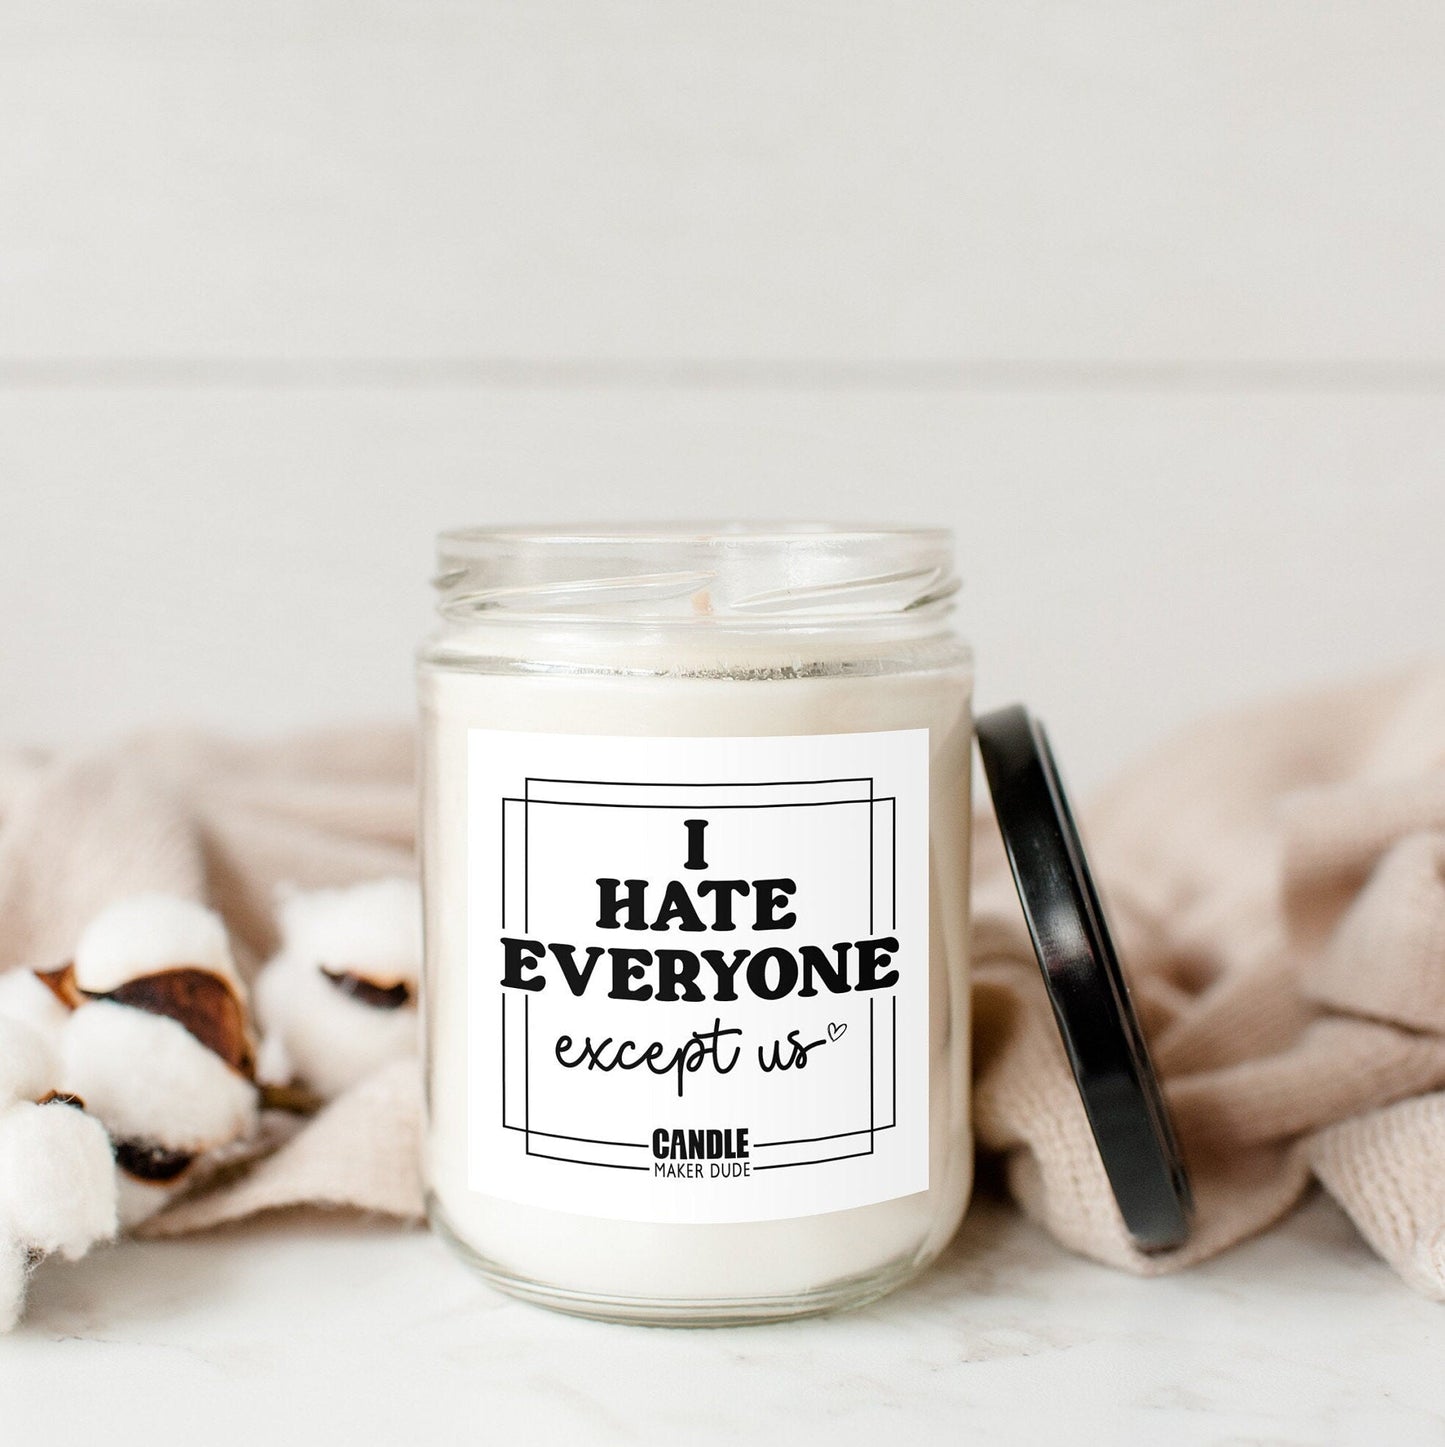 I Hate Everyone But Us Funny Candle For Friend, Best Friend Gift Ideas, Best Friends Forever